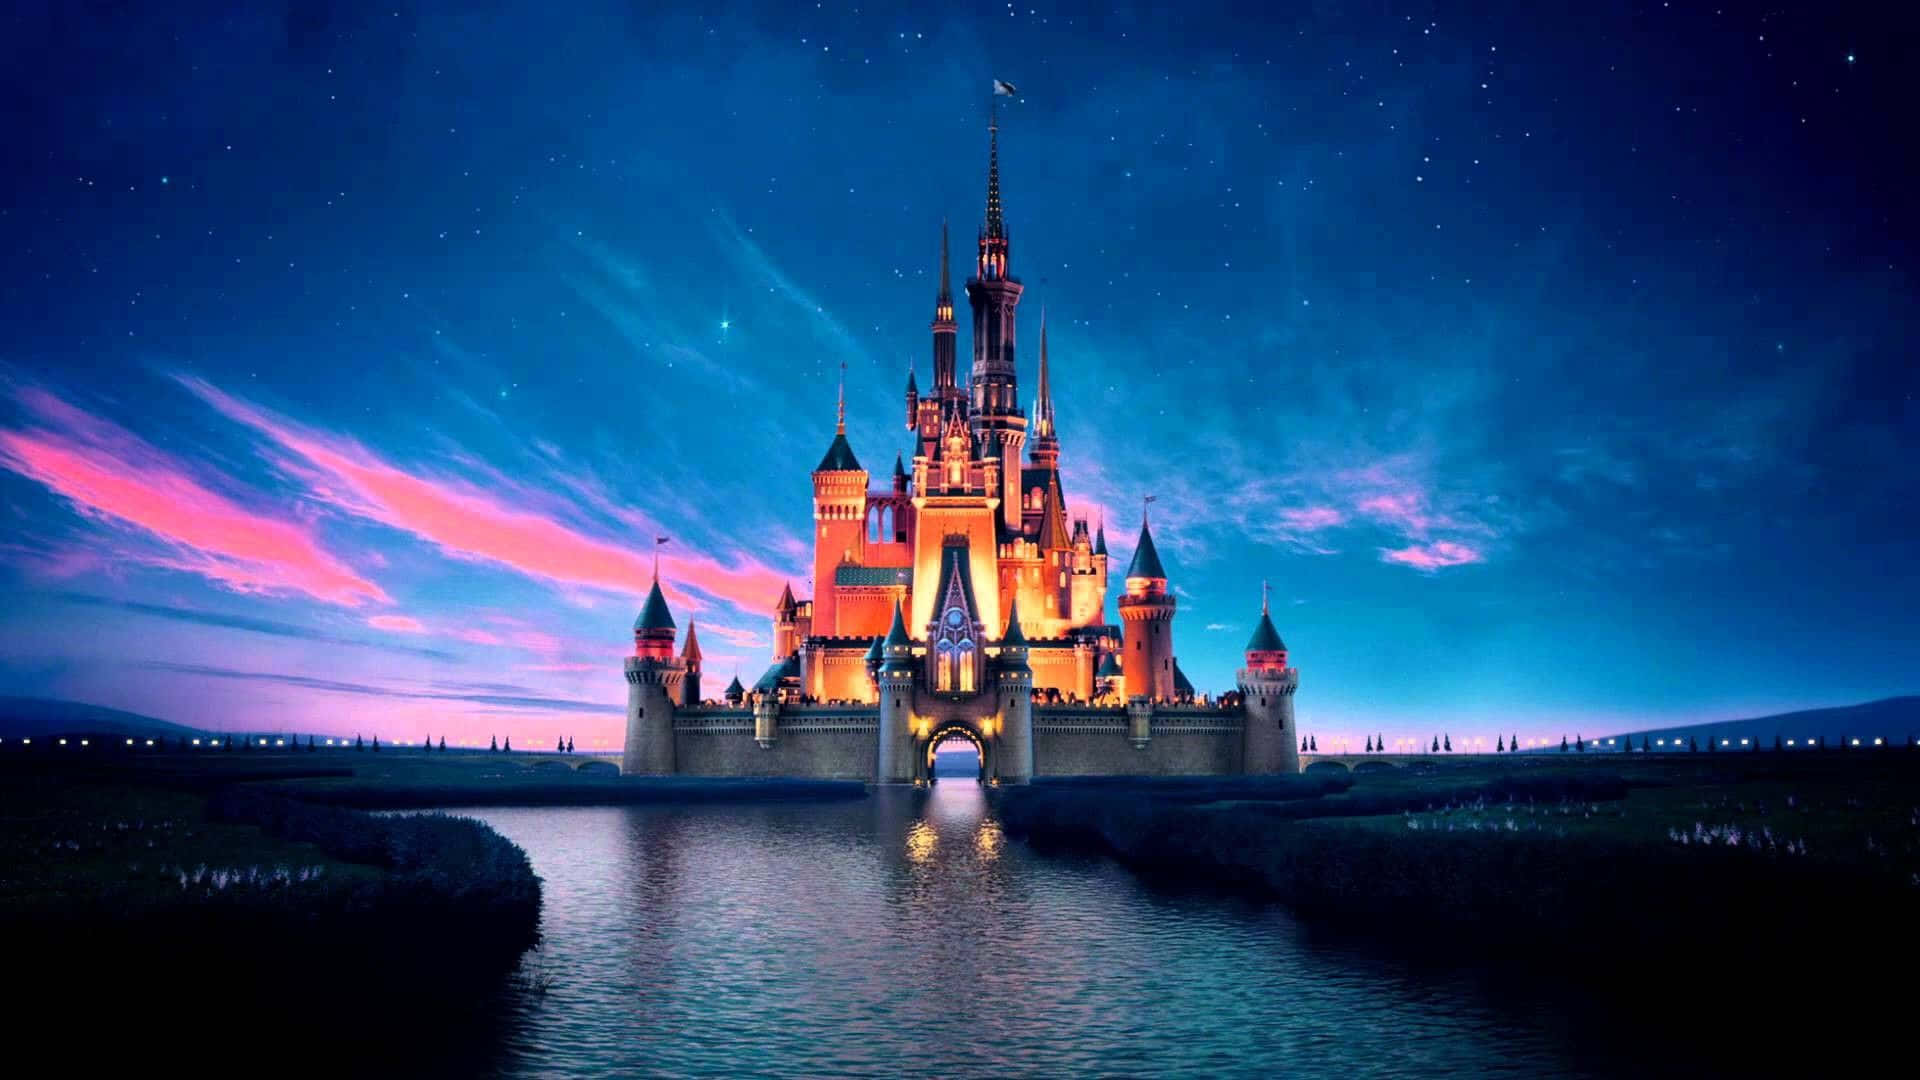 Enjoy The Beauty Of The Classic Disney Film With This Gorgeous Aesthetic Wallpaper Wallpaper